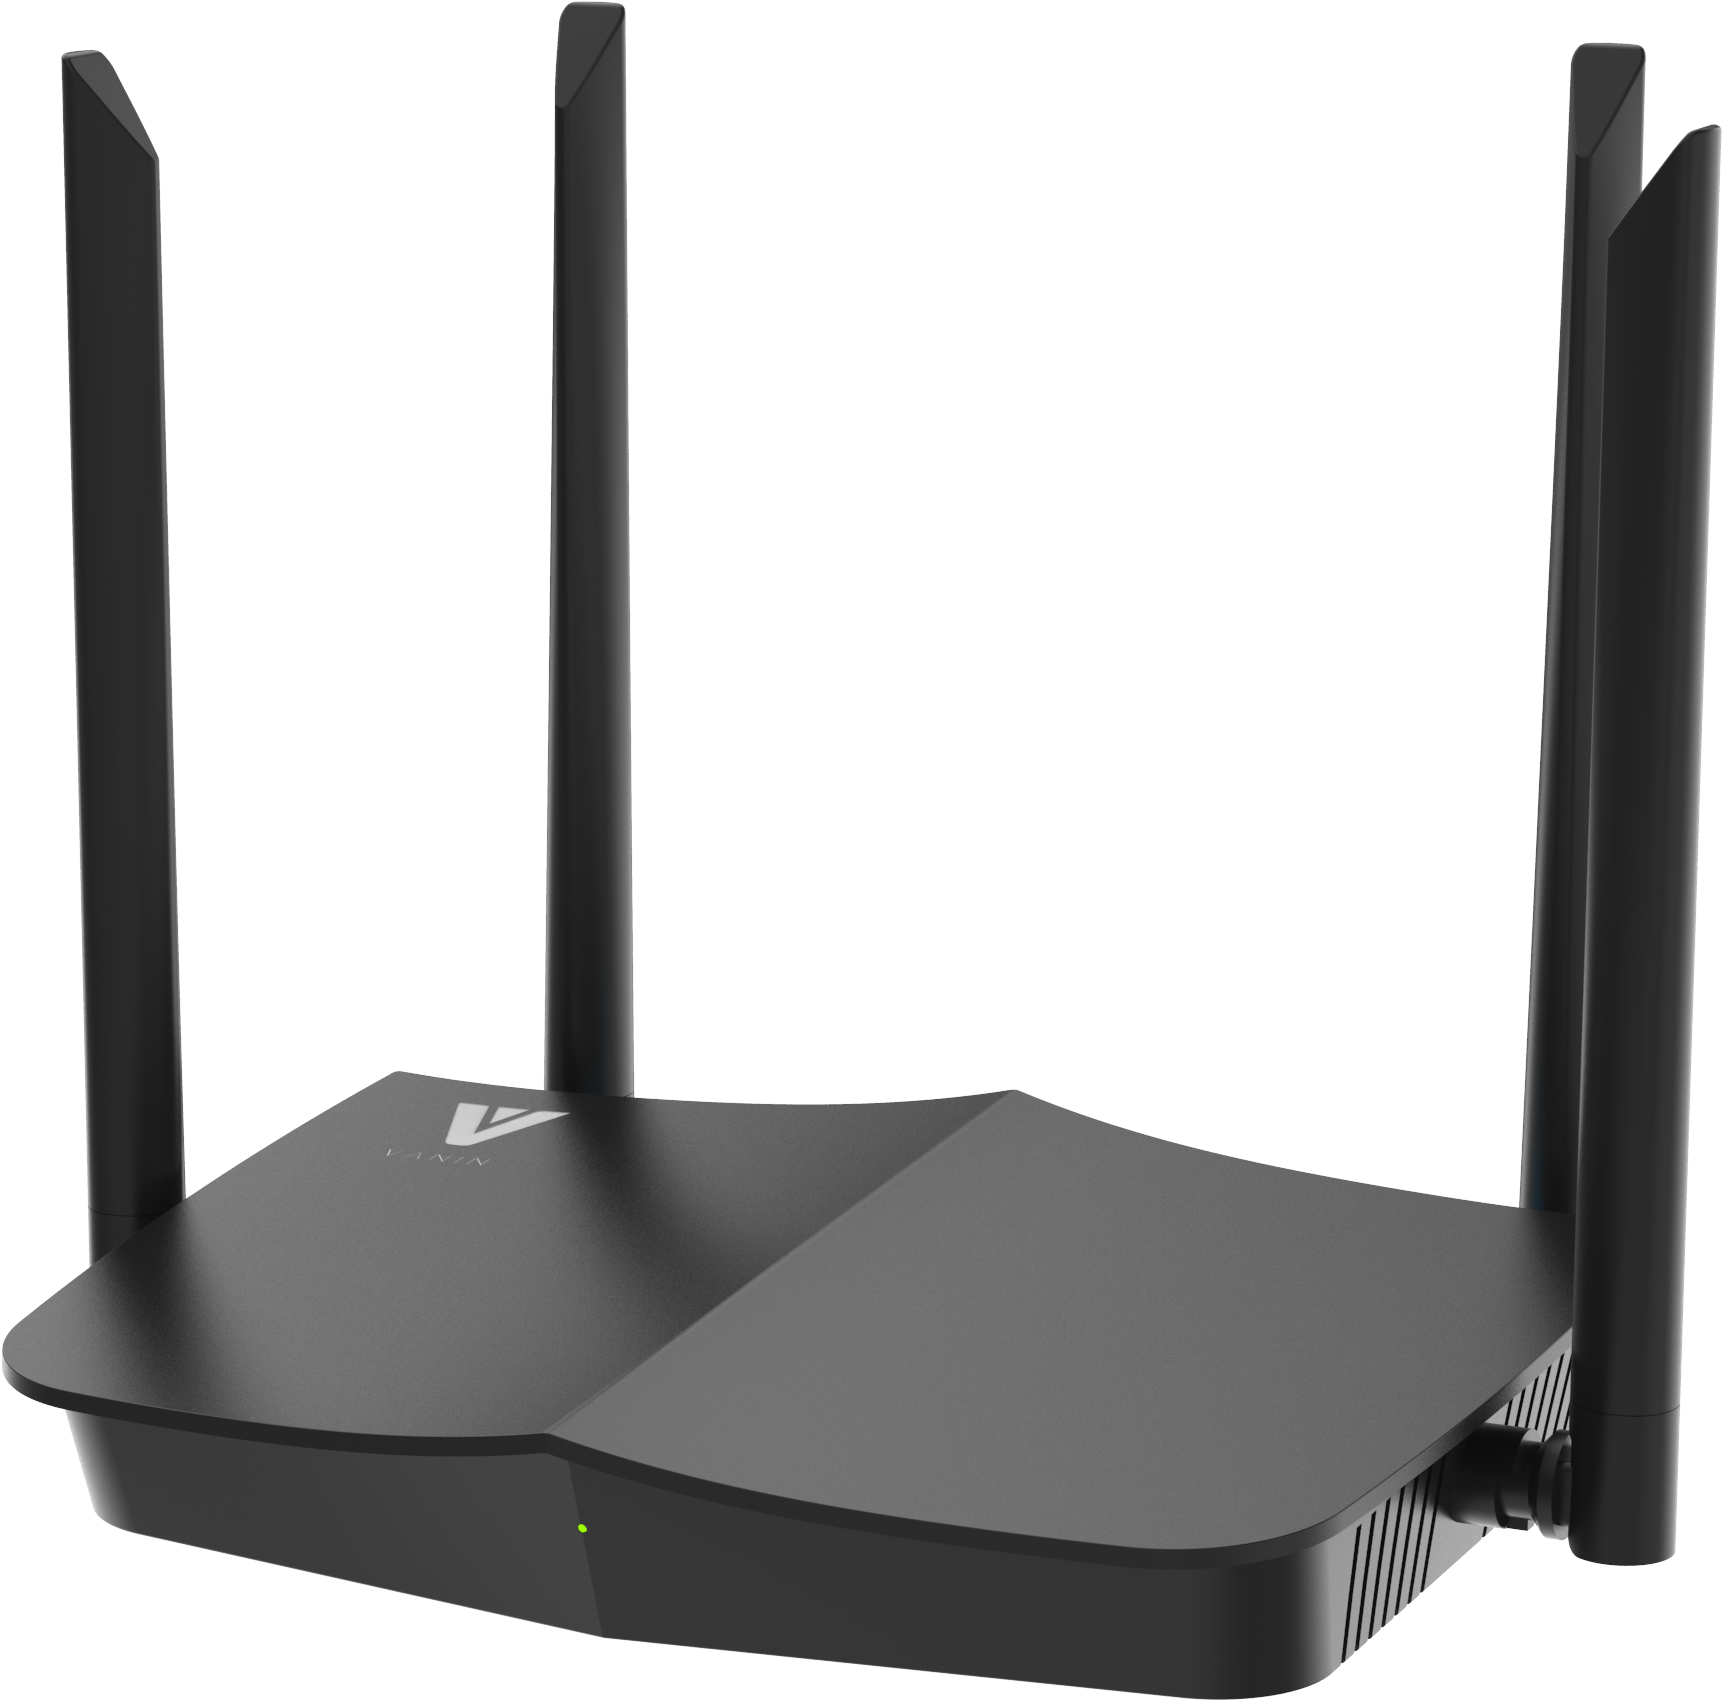 Modern Wireless Routerwith Antennas PNG image